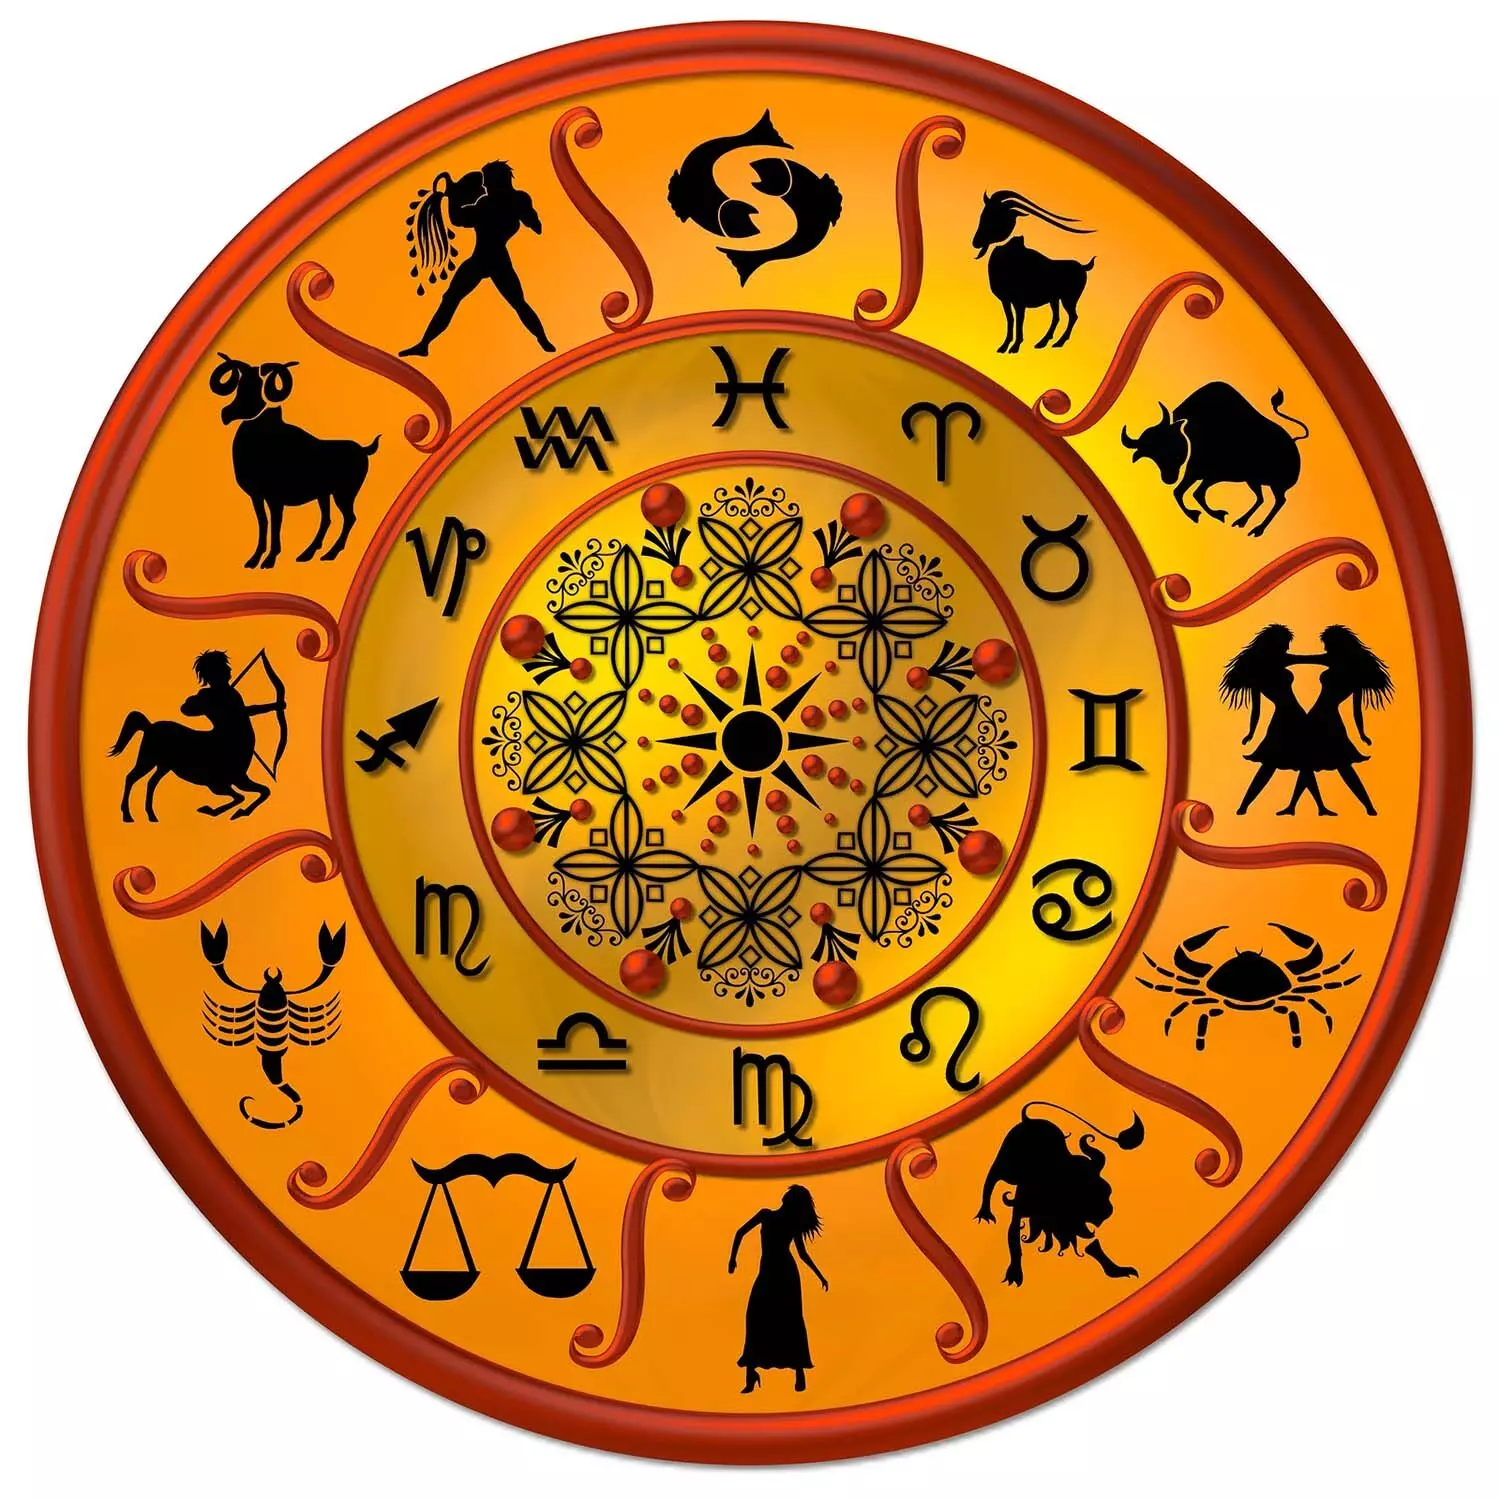 22 July – Know your todays horoscope